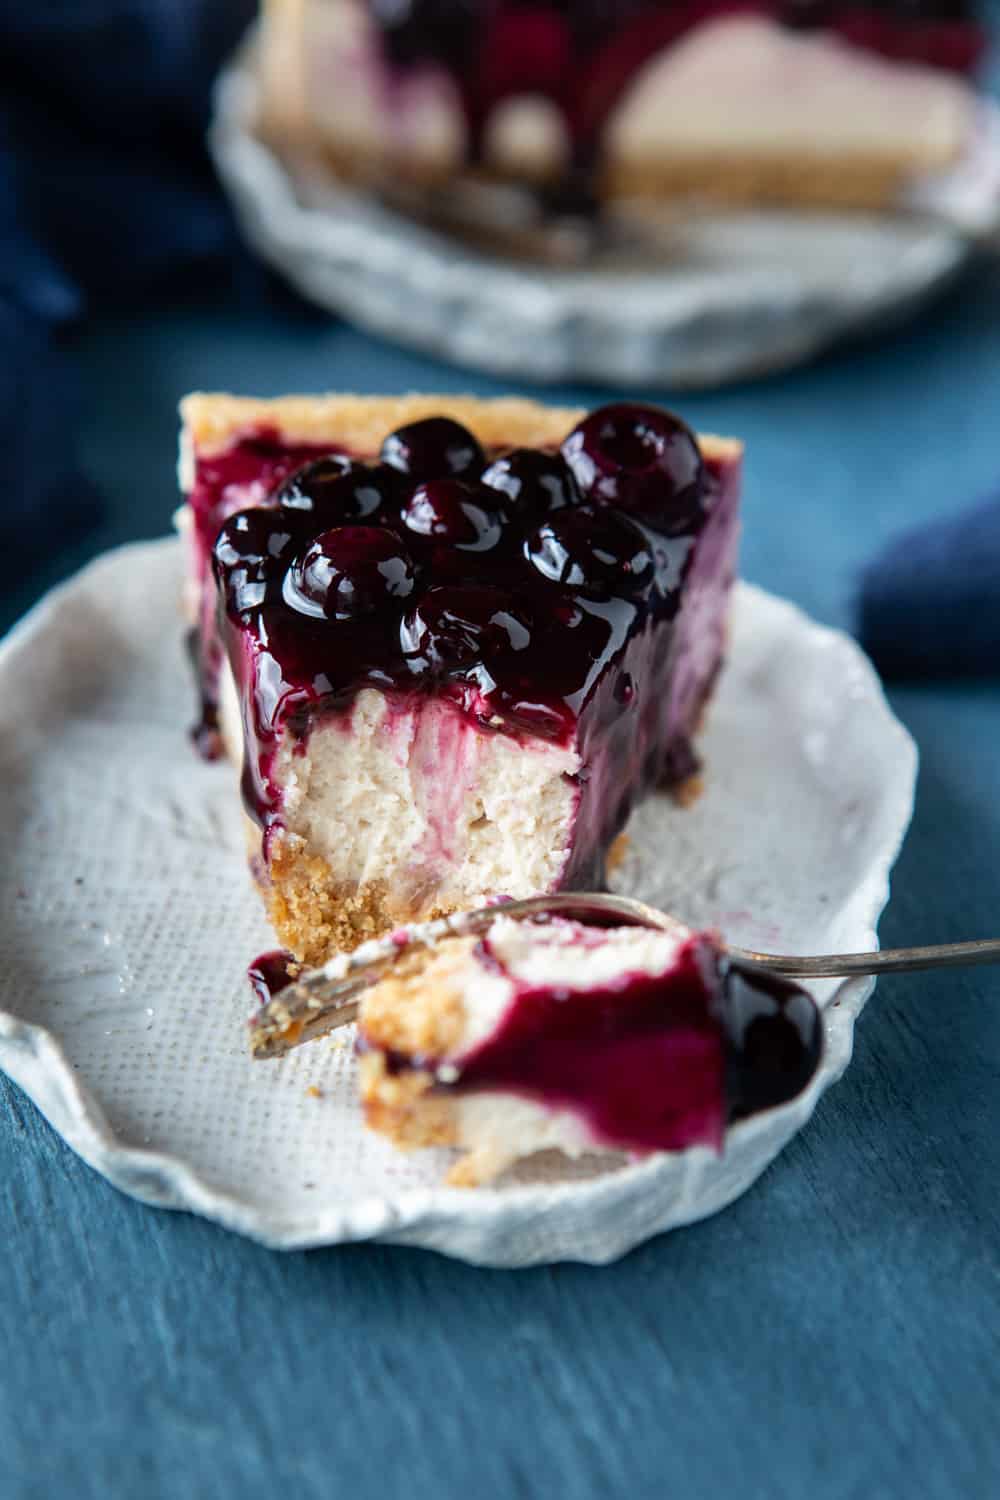 Slice of Baked Vegan Blueberry Cheesecake with a junk taken out